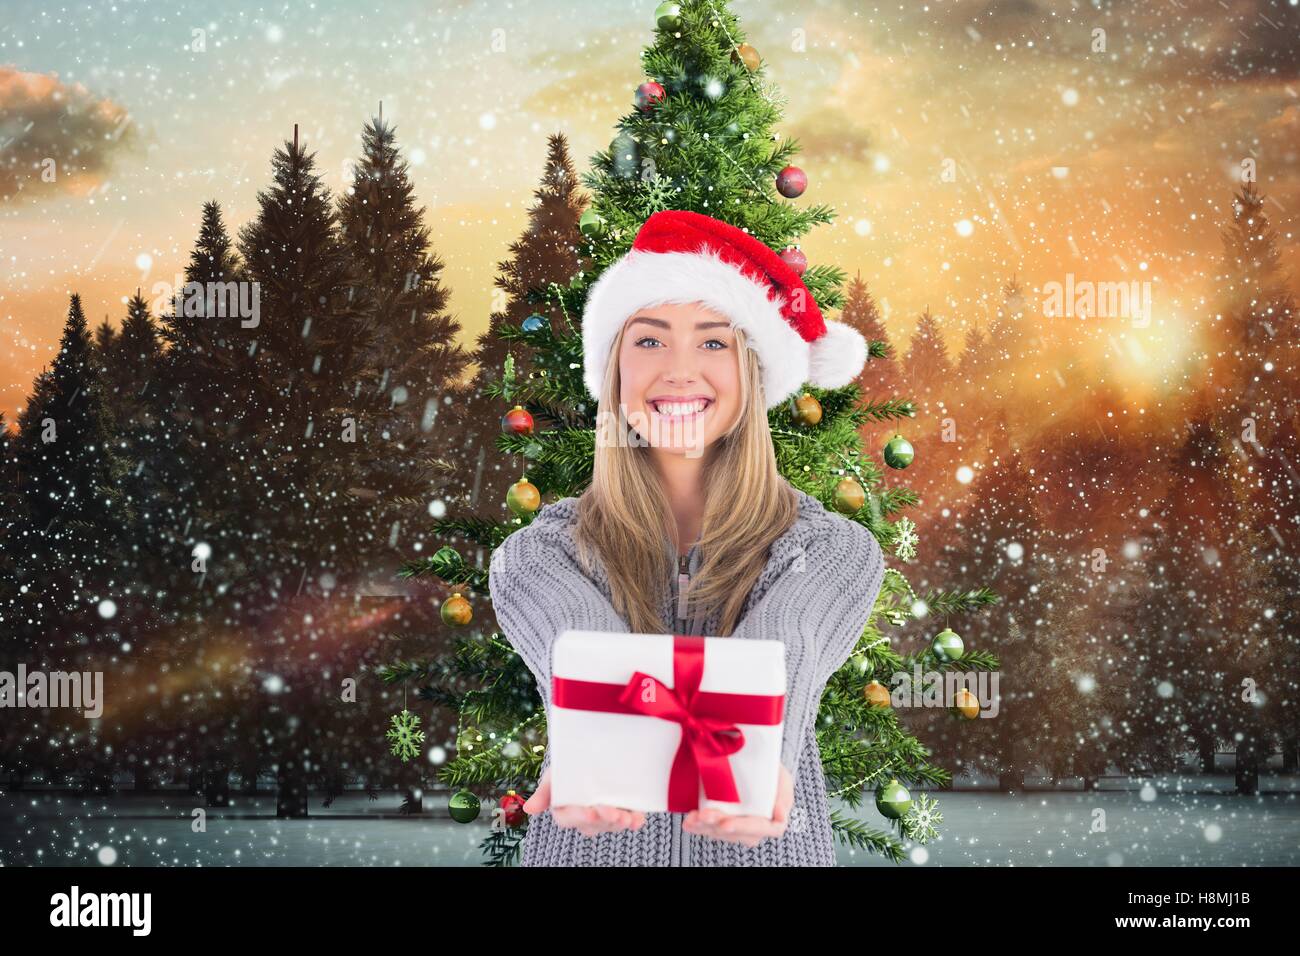 Beautiful woman in santa hat holding a gift Stock Photo